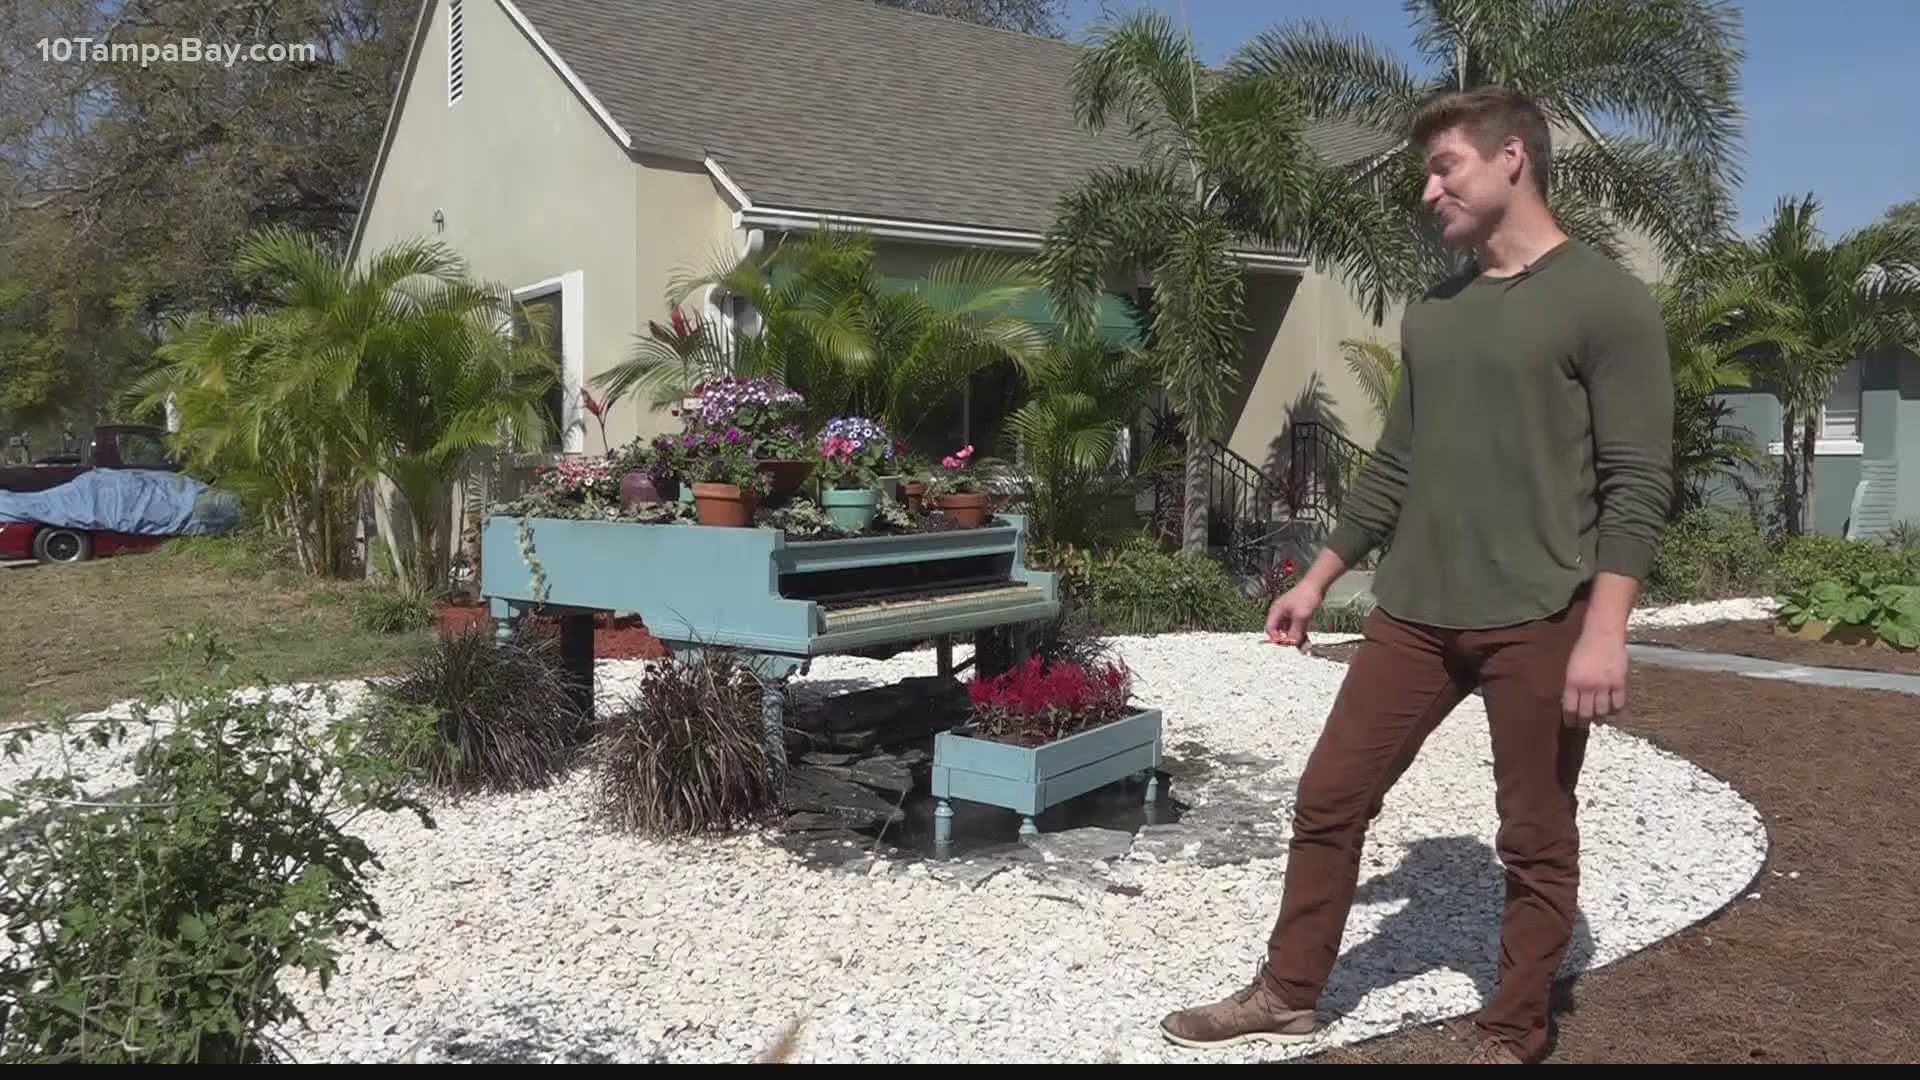 Graham Nix has played piano for over two decades. He decided to put a twist on his favorite instrument by turning one into a lawn fountain.